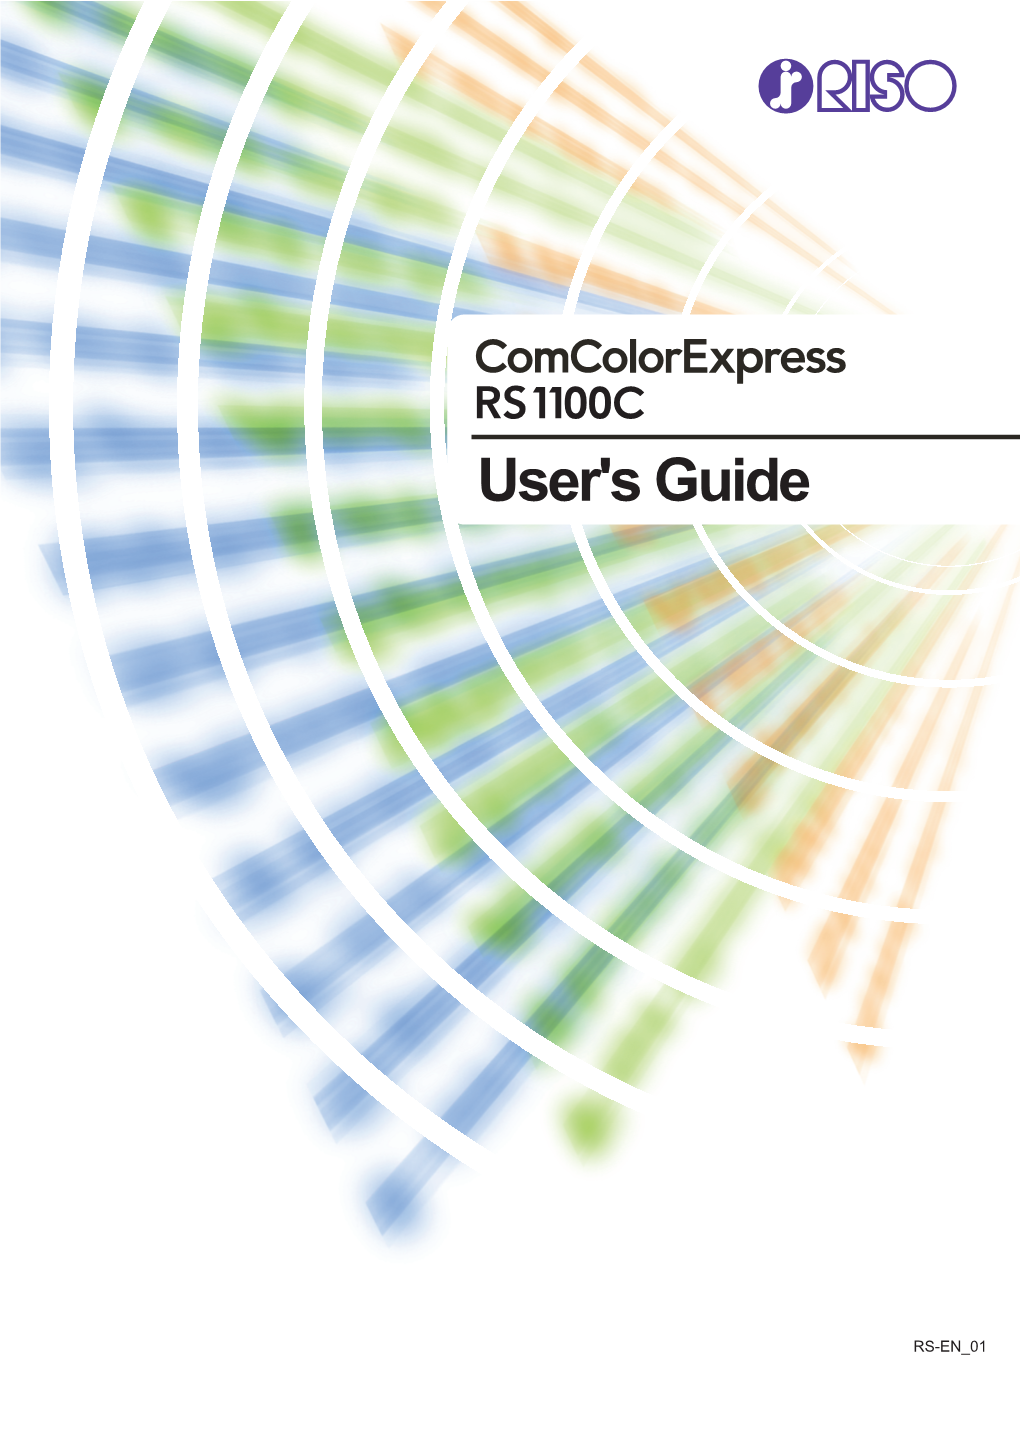 Riso Comcolorexpress RS1100C User Guide